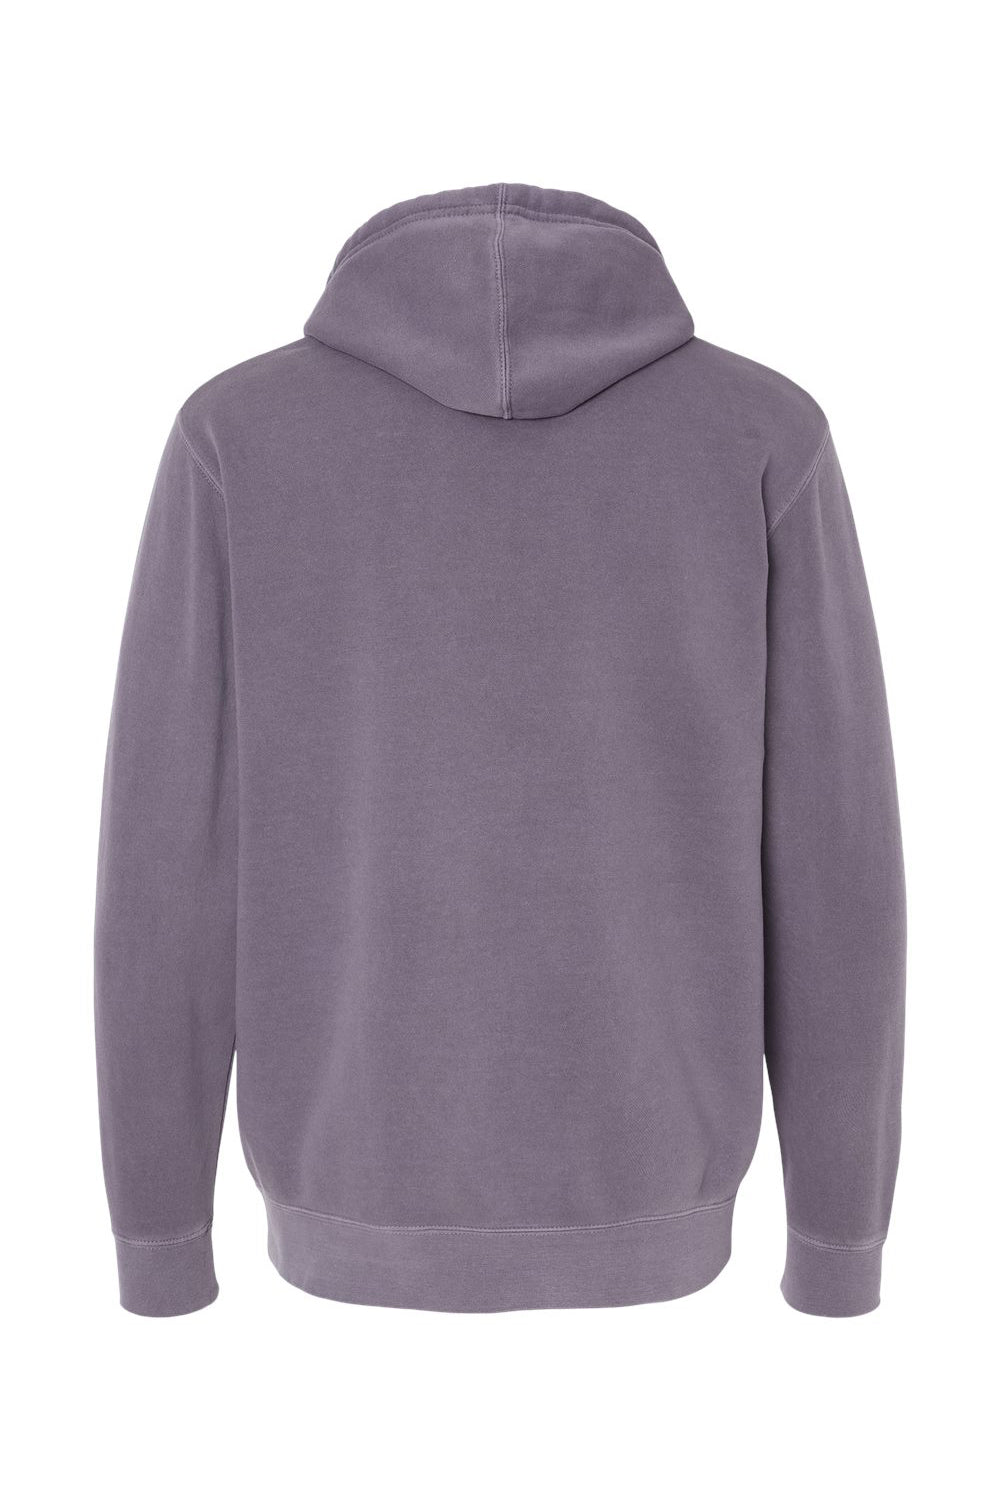 Independent Trading Co. PRM4500 Mens Pigment Dyed Hooded Sweatshirt Hoodie Plum Purple Flat Back